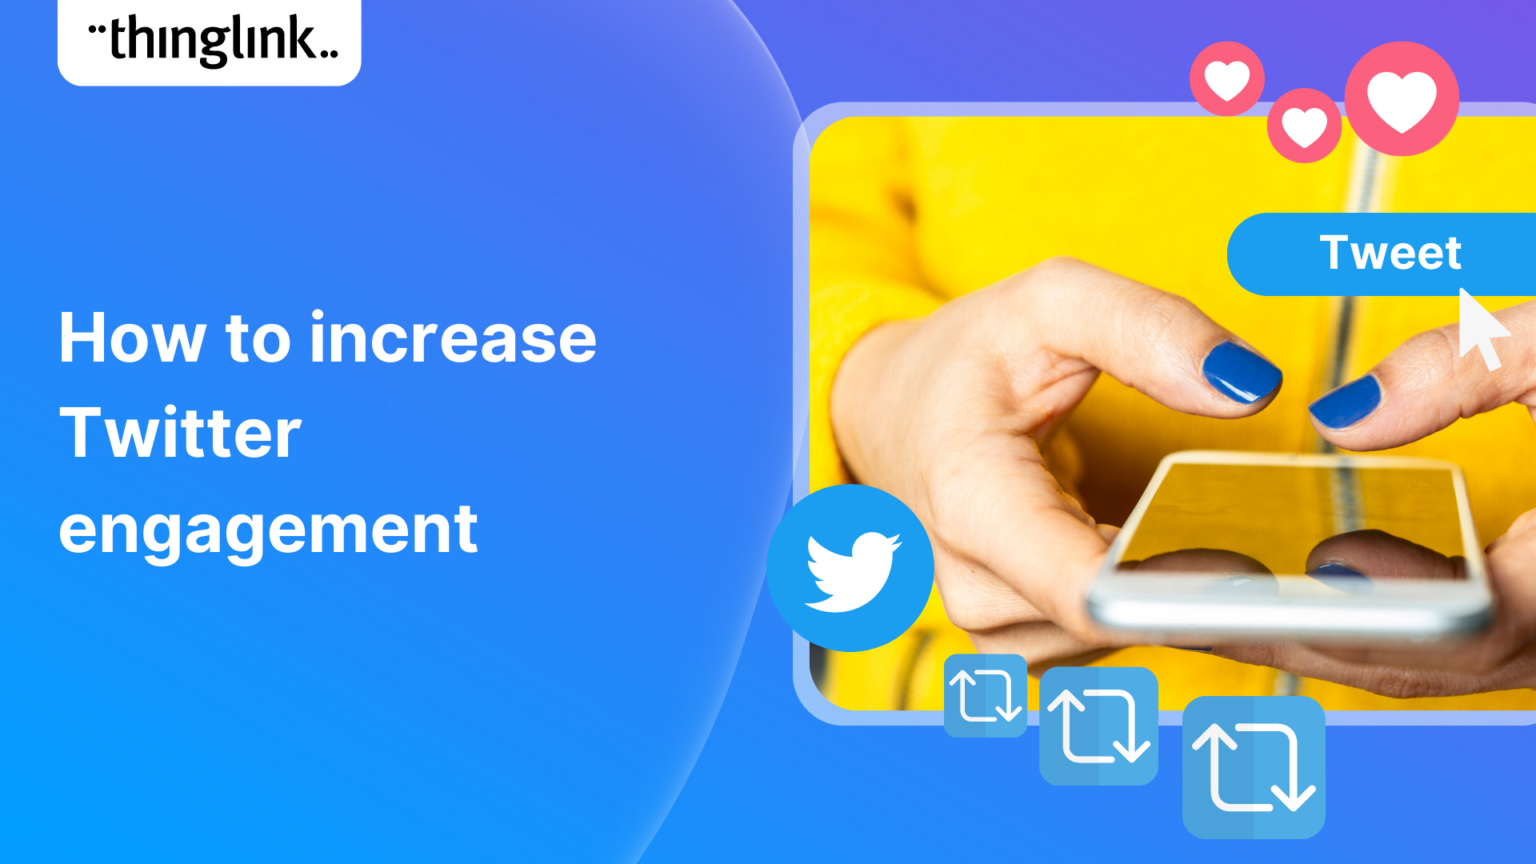 How to increase Twitter engagement